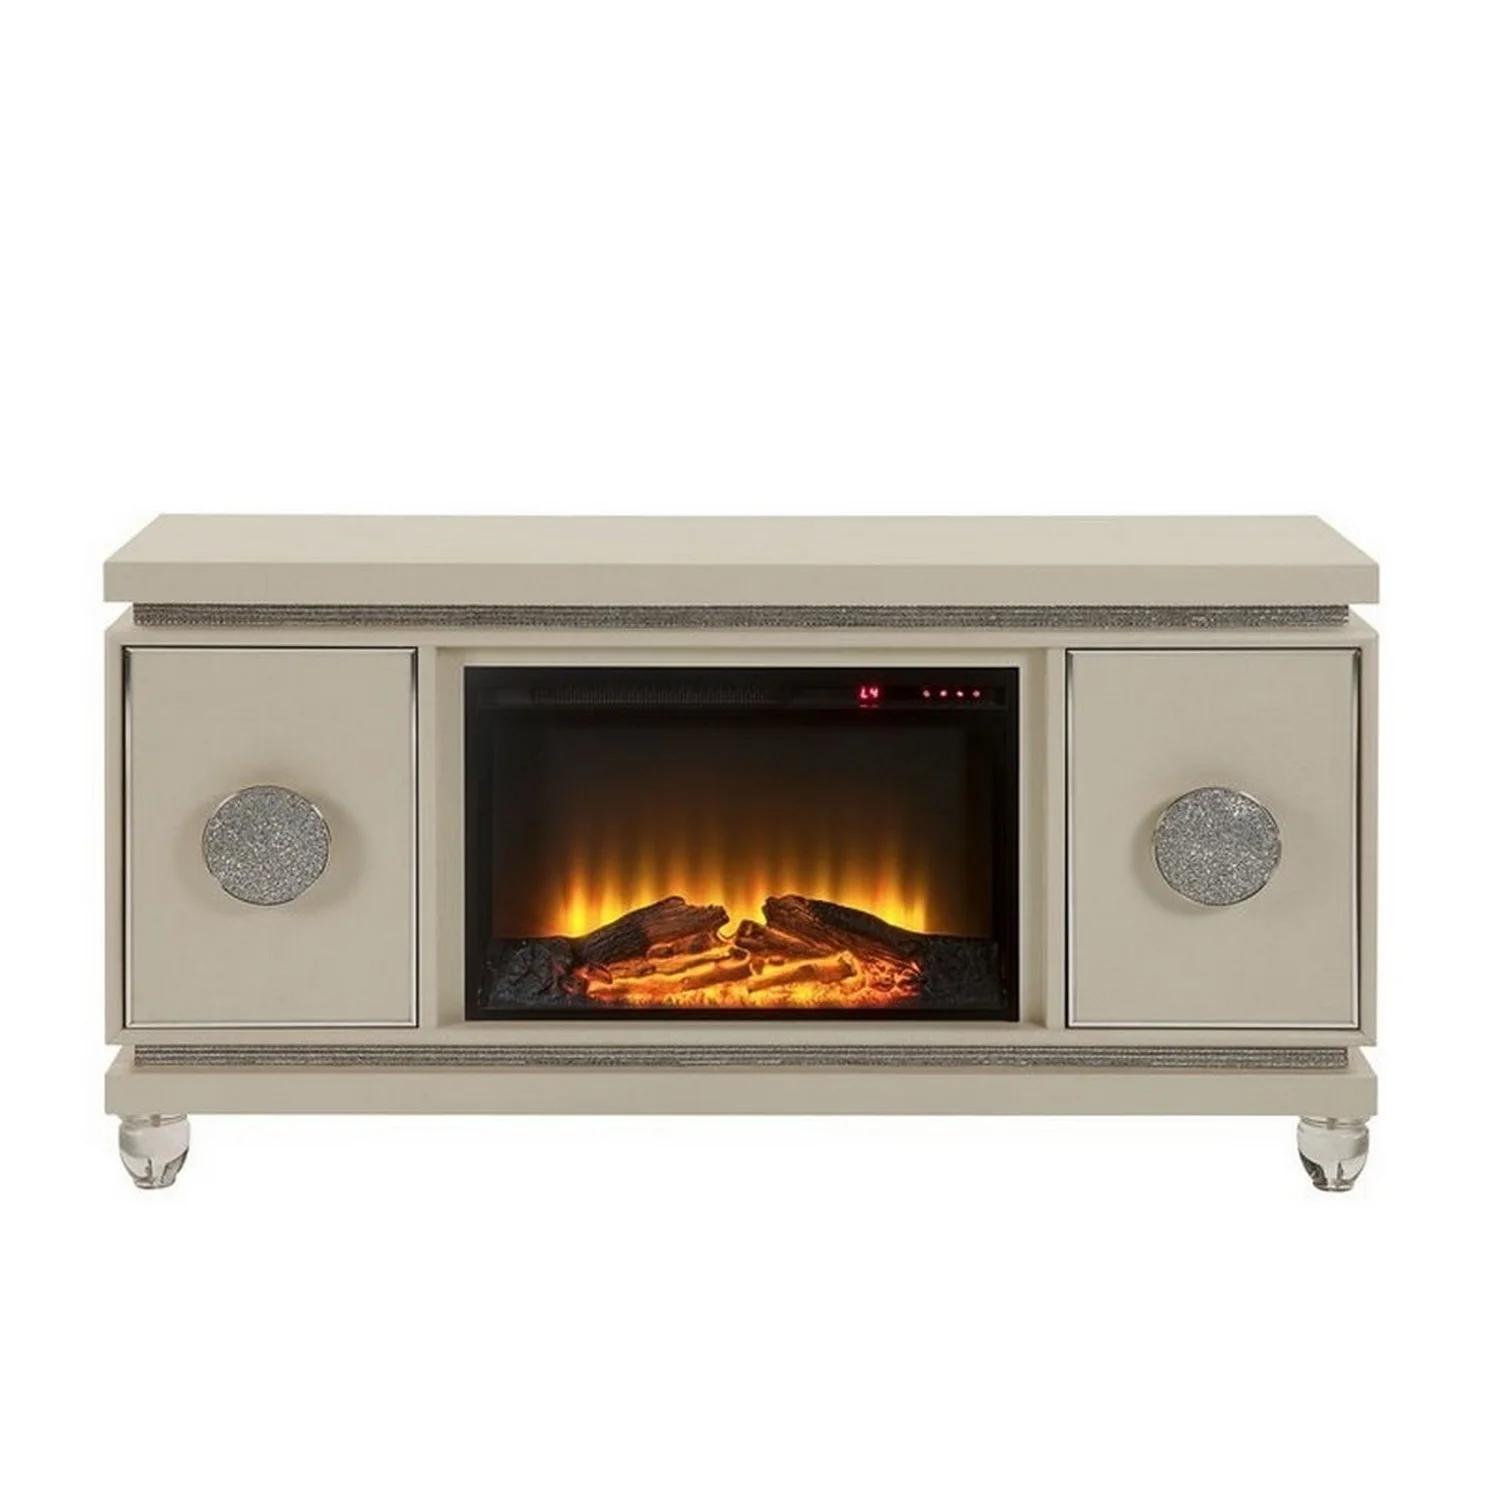 Modern Fireplace Noralie 90535 in Ivory PU